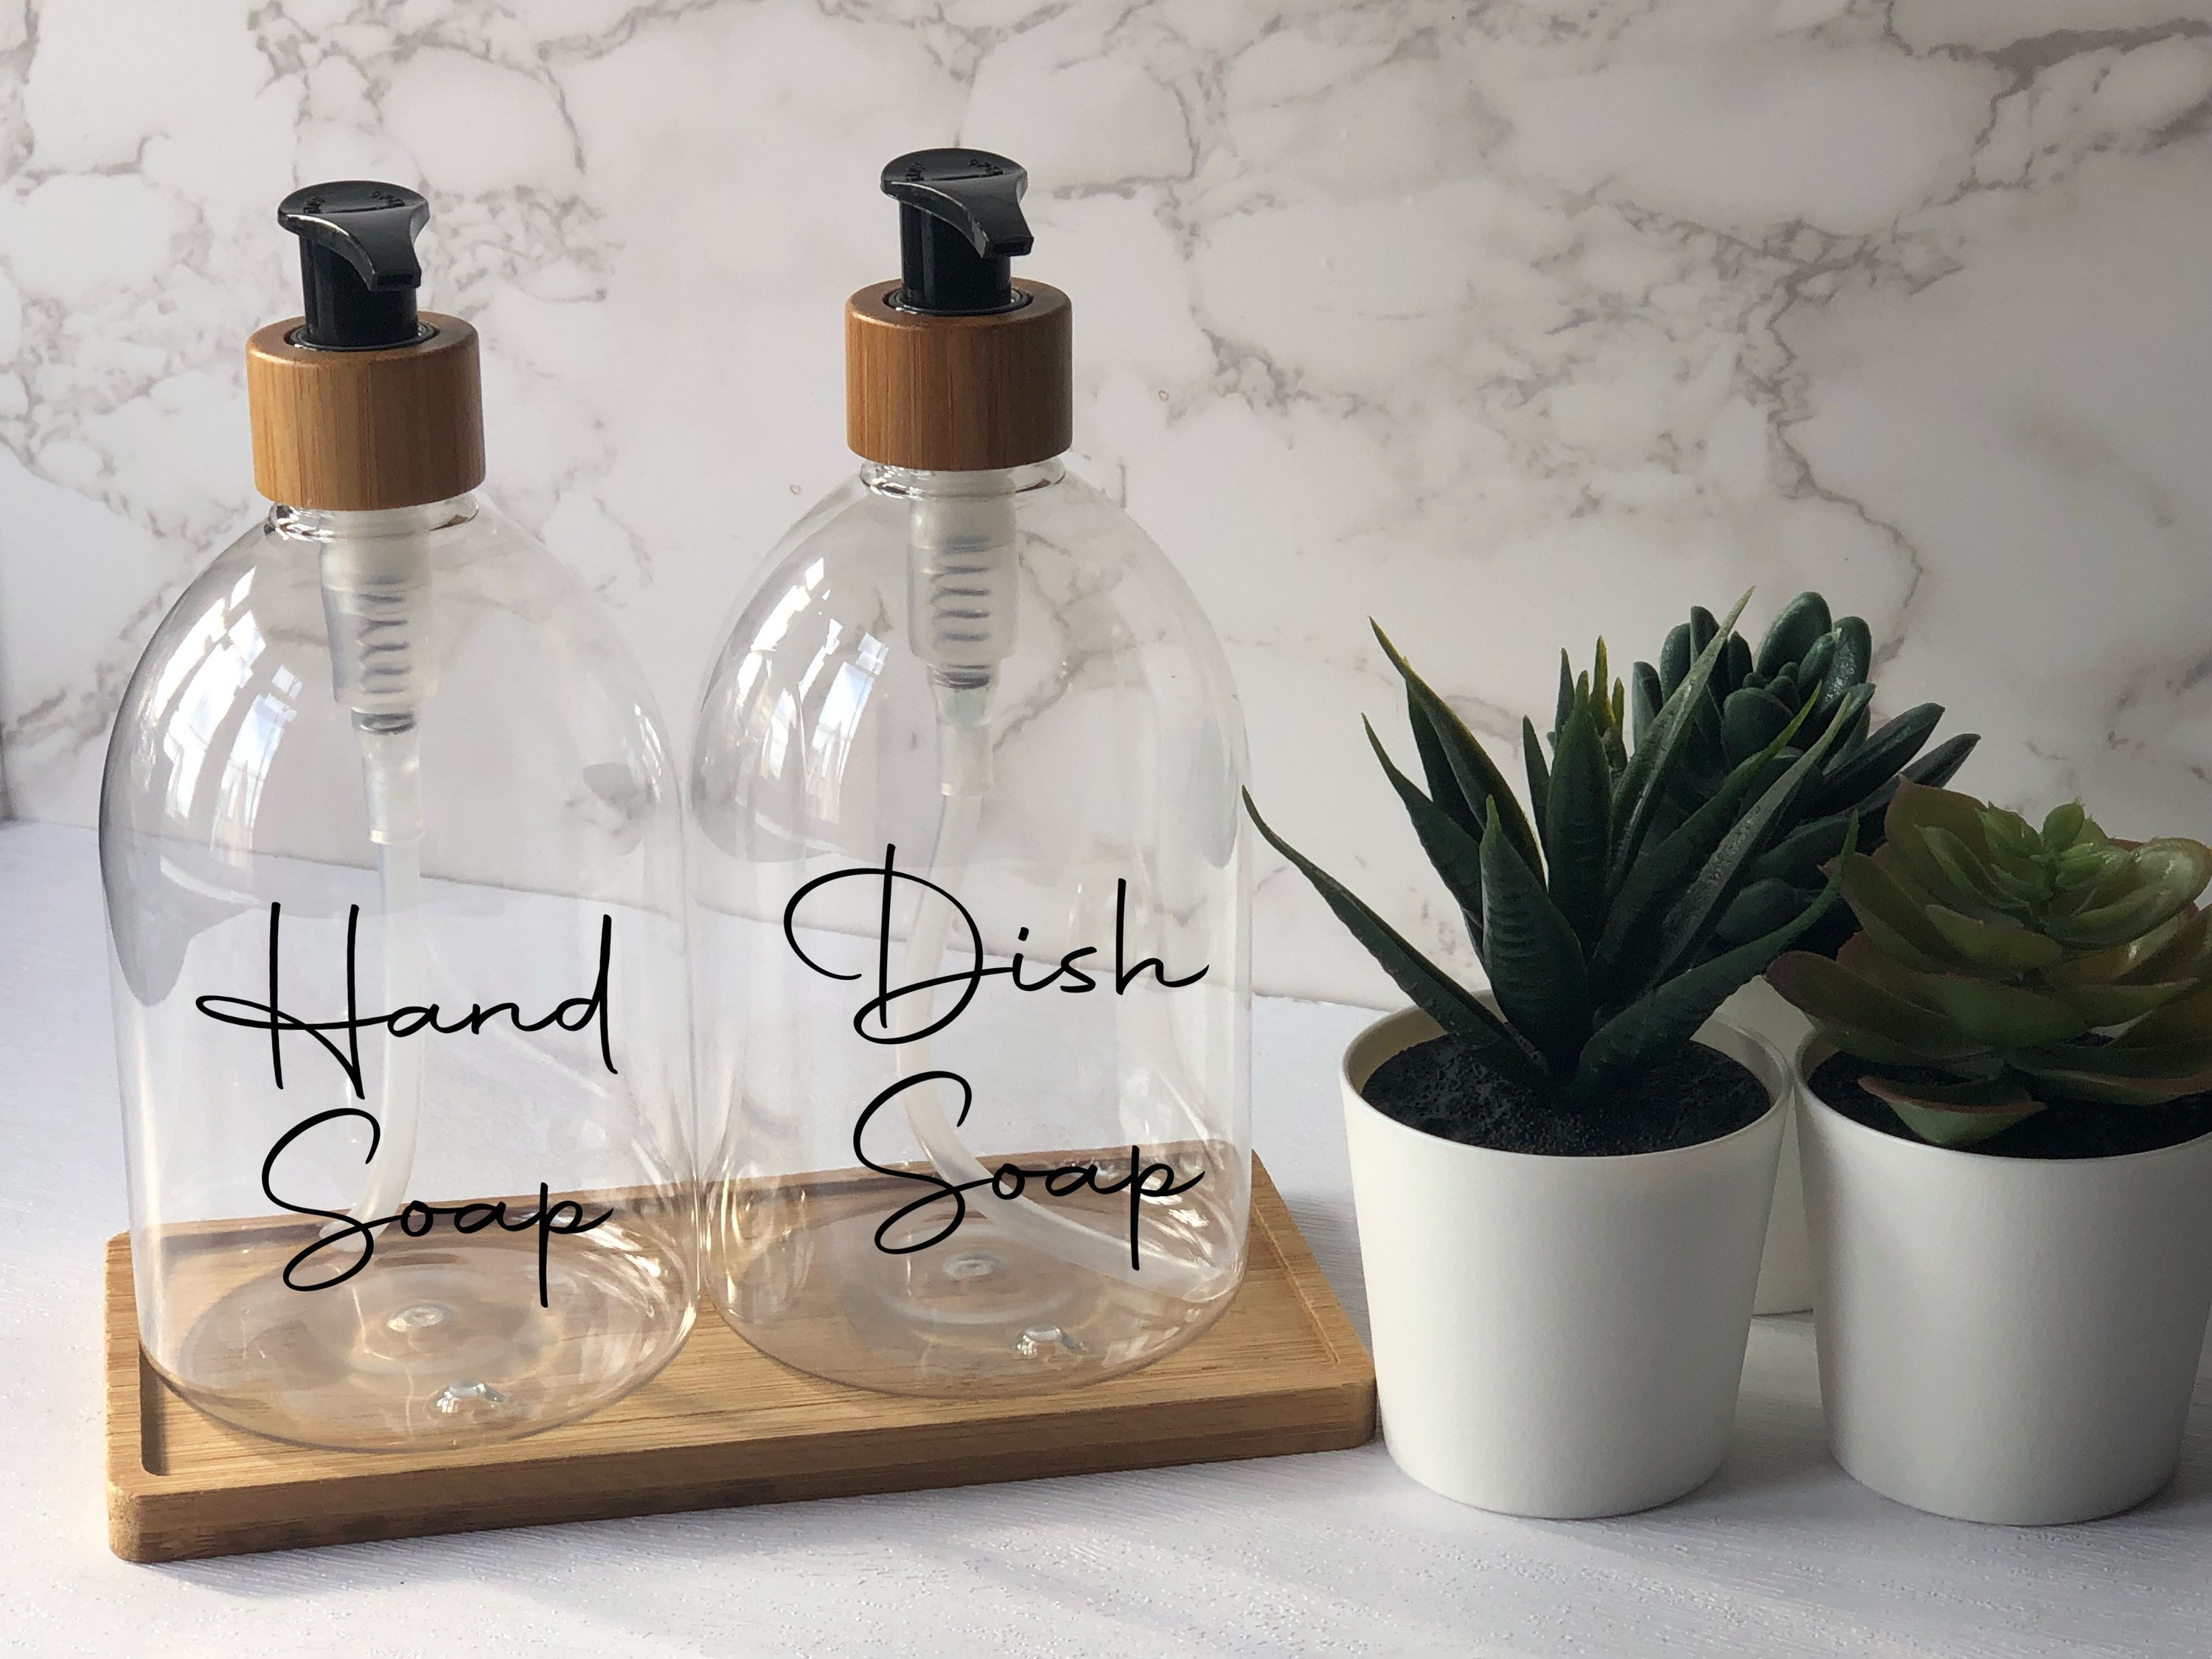 Hand And Dish Soap Dispenser For Kitchen Sink - Farmhouse Kitchen Soap  Dispenser Set With Tray (bla